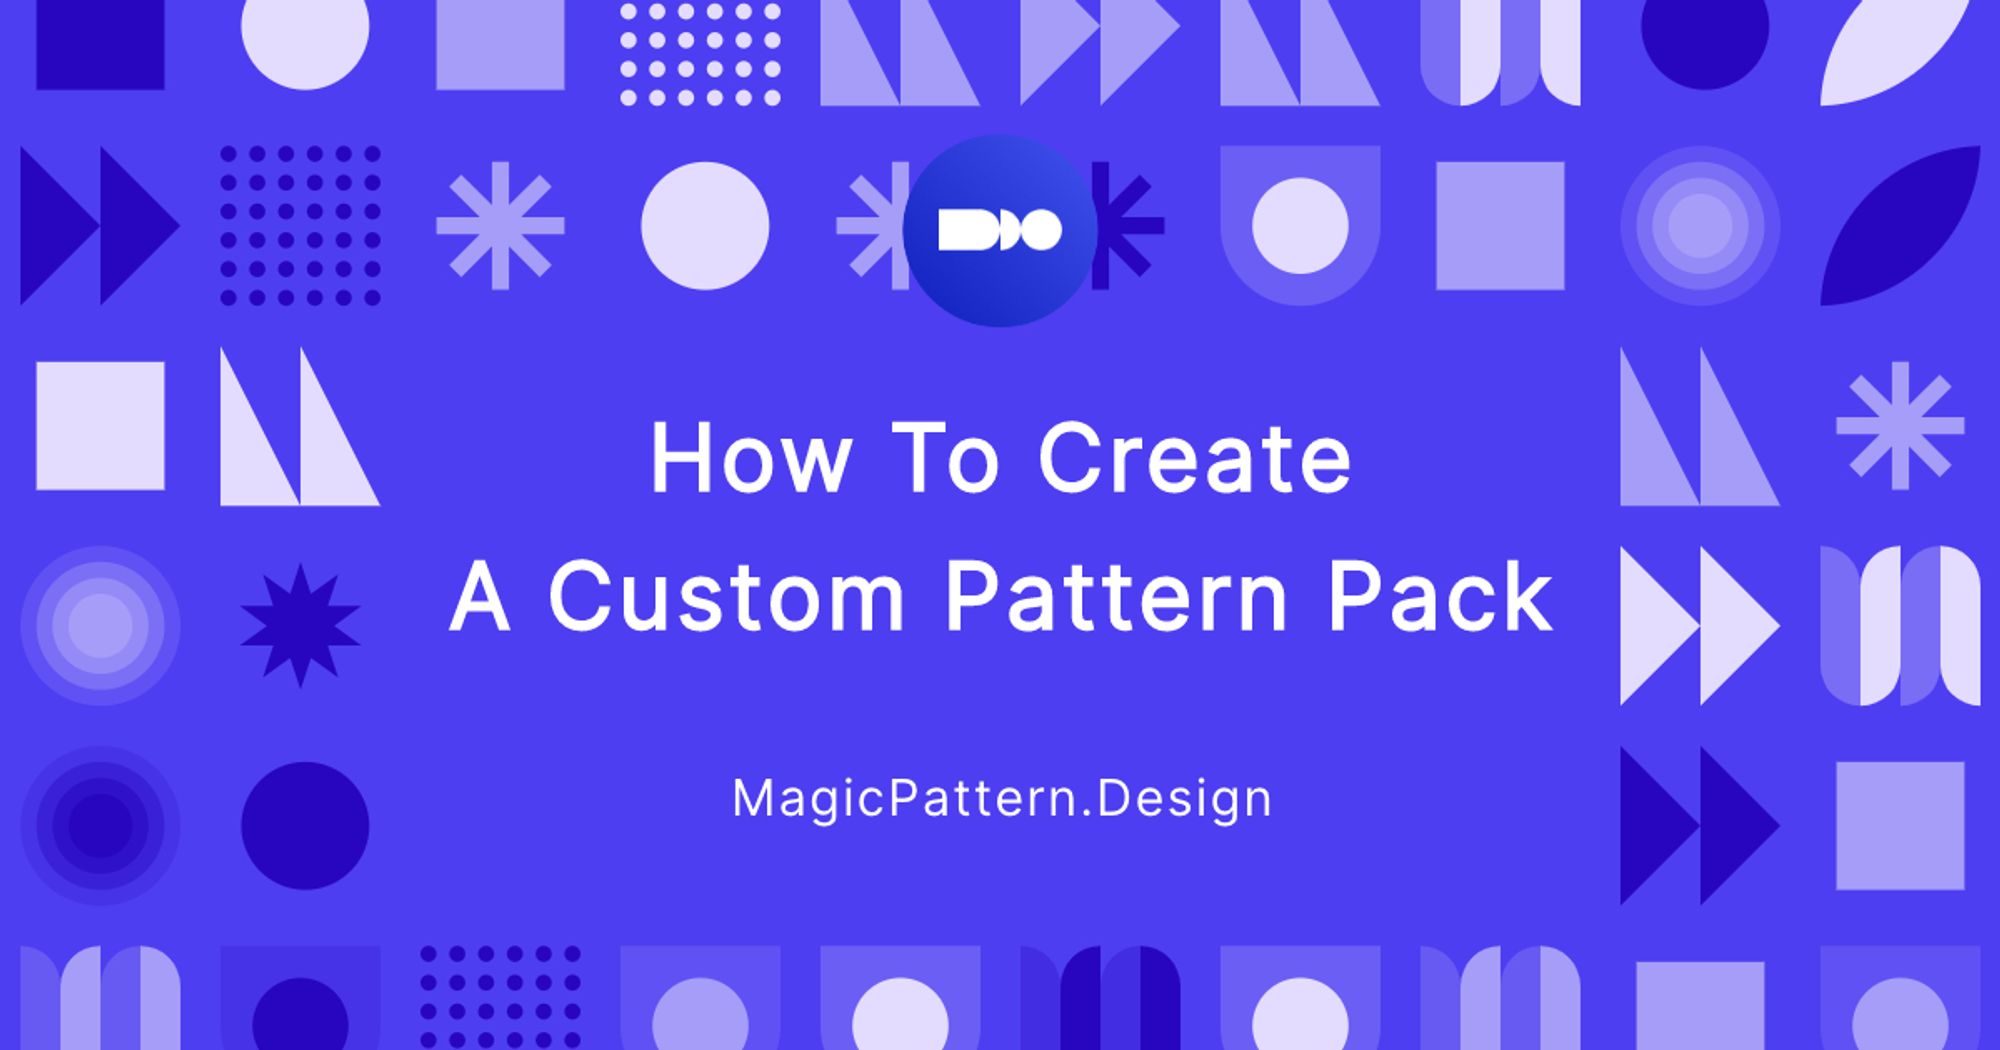 How to create a custom pattern pack